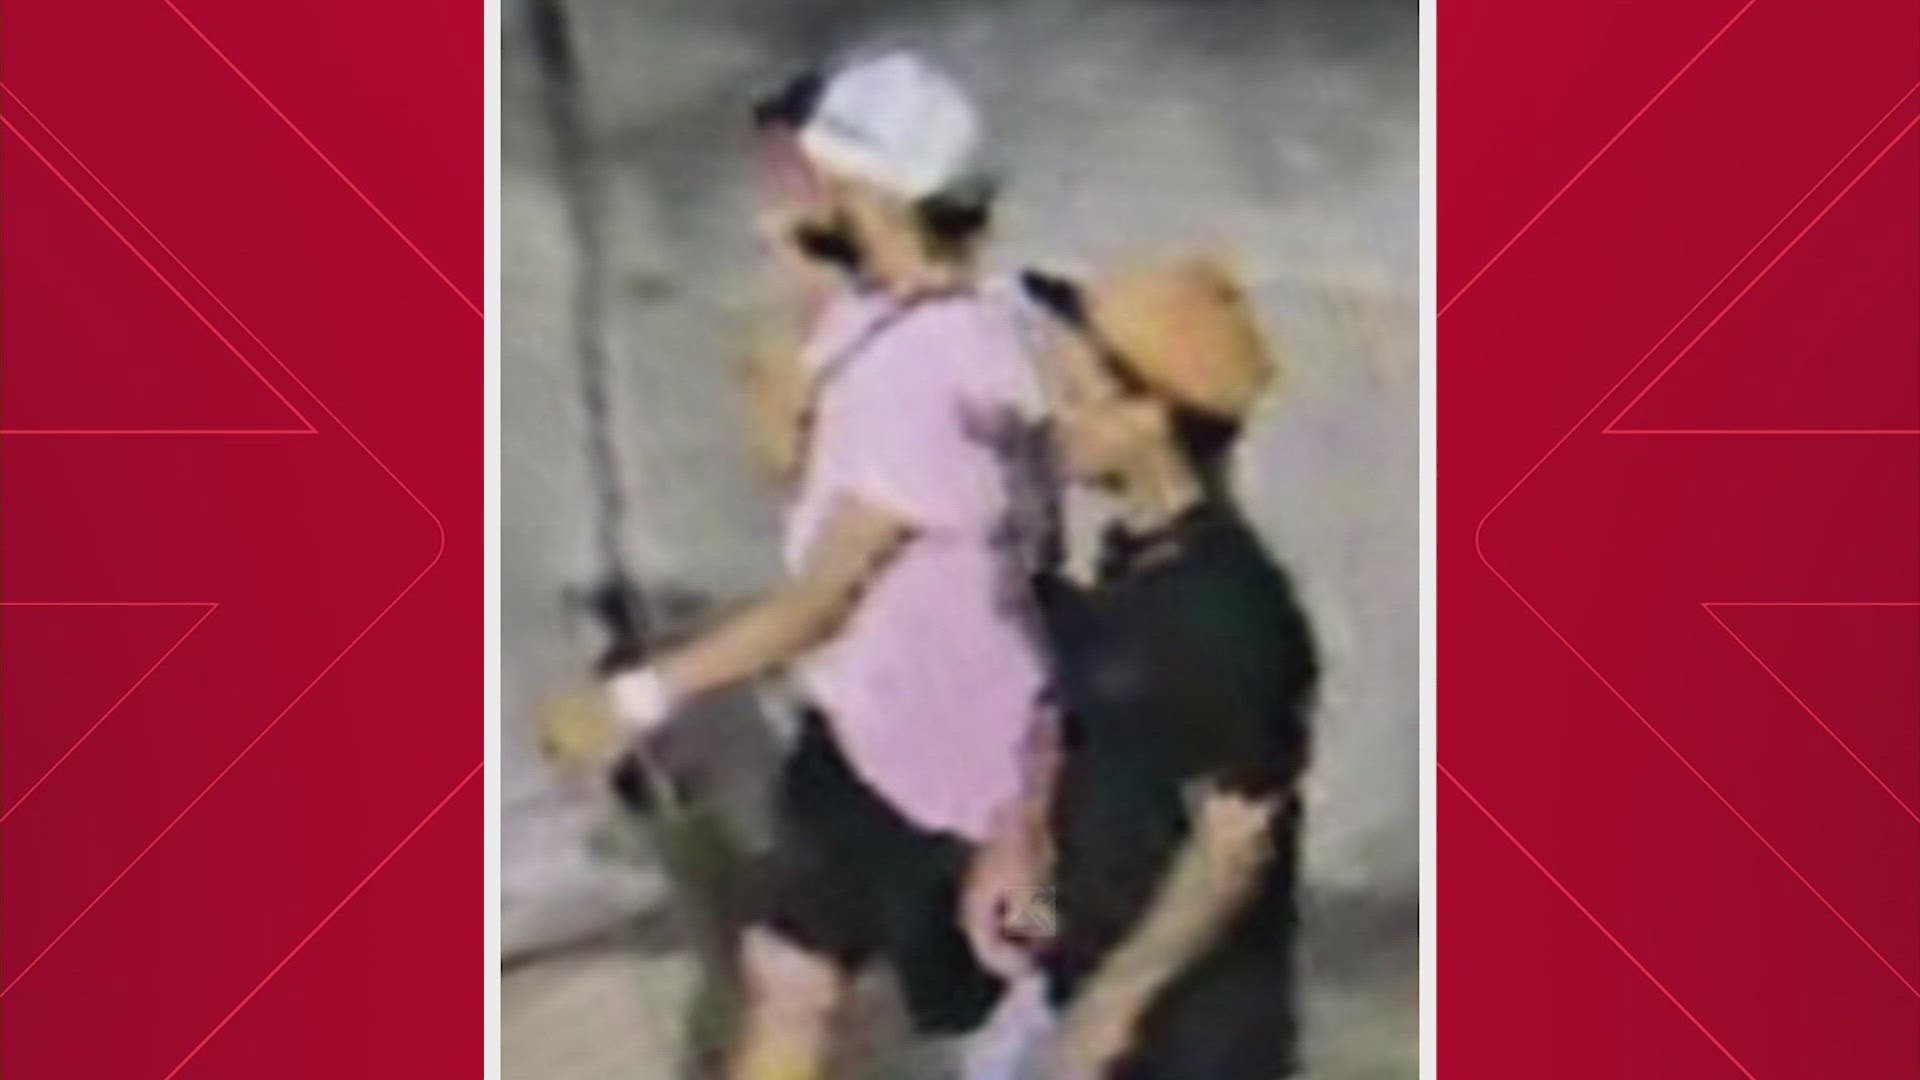 Houston police described the persons of interest as "two males of an unknown age, wearing baseball-style caps."